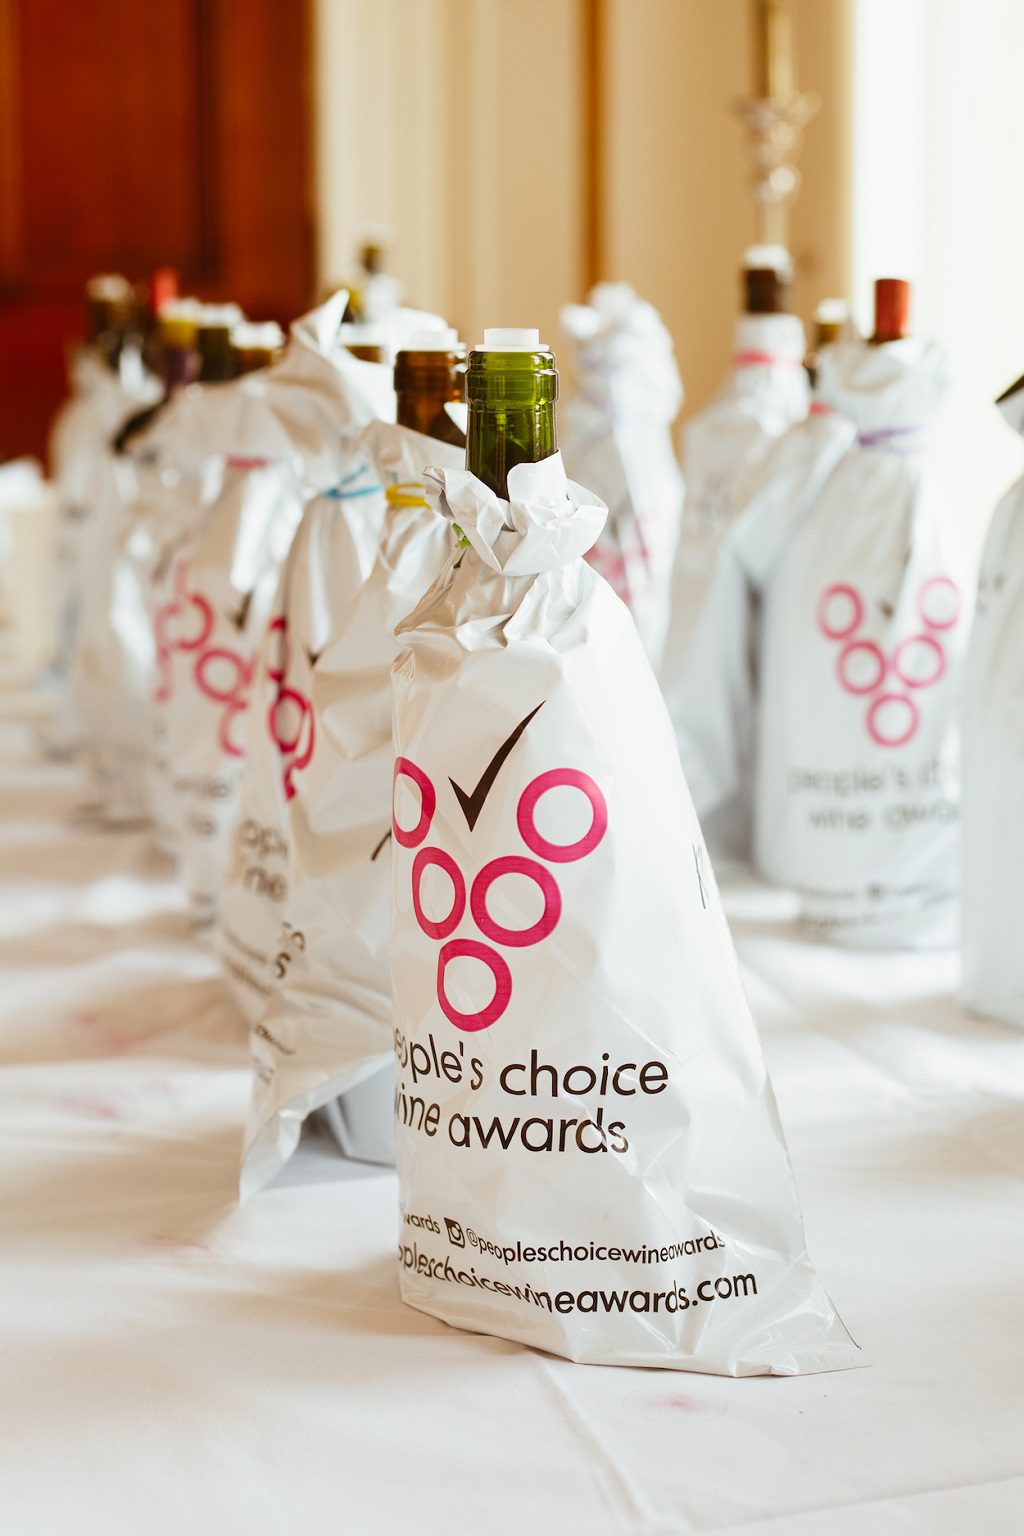 Wine bottles at the awards